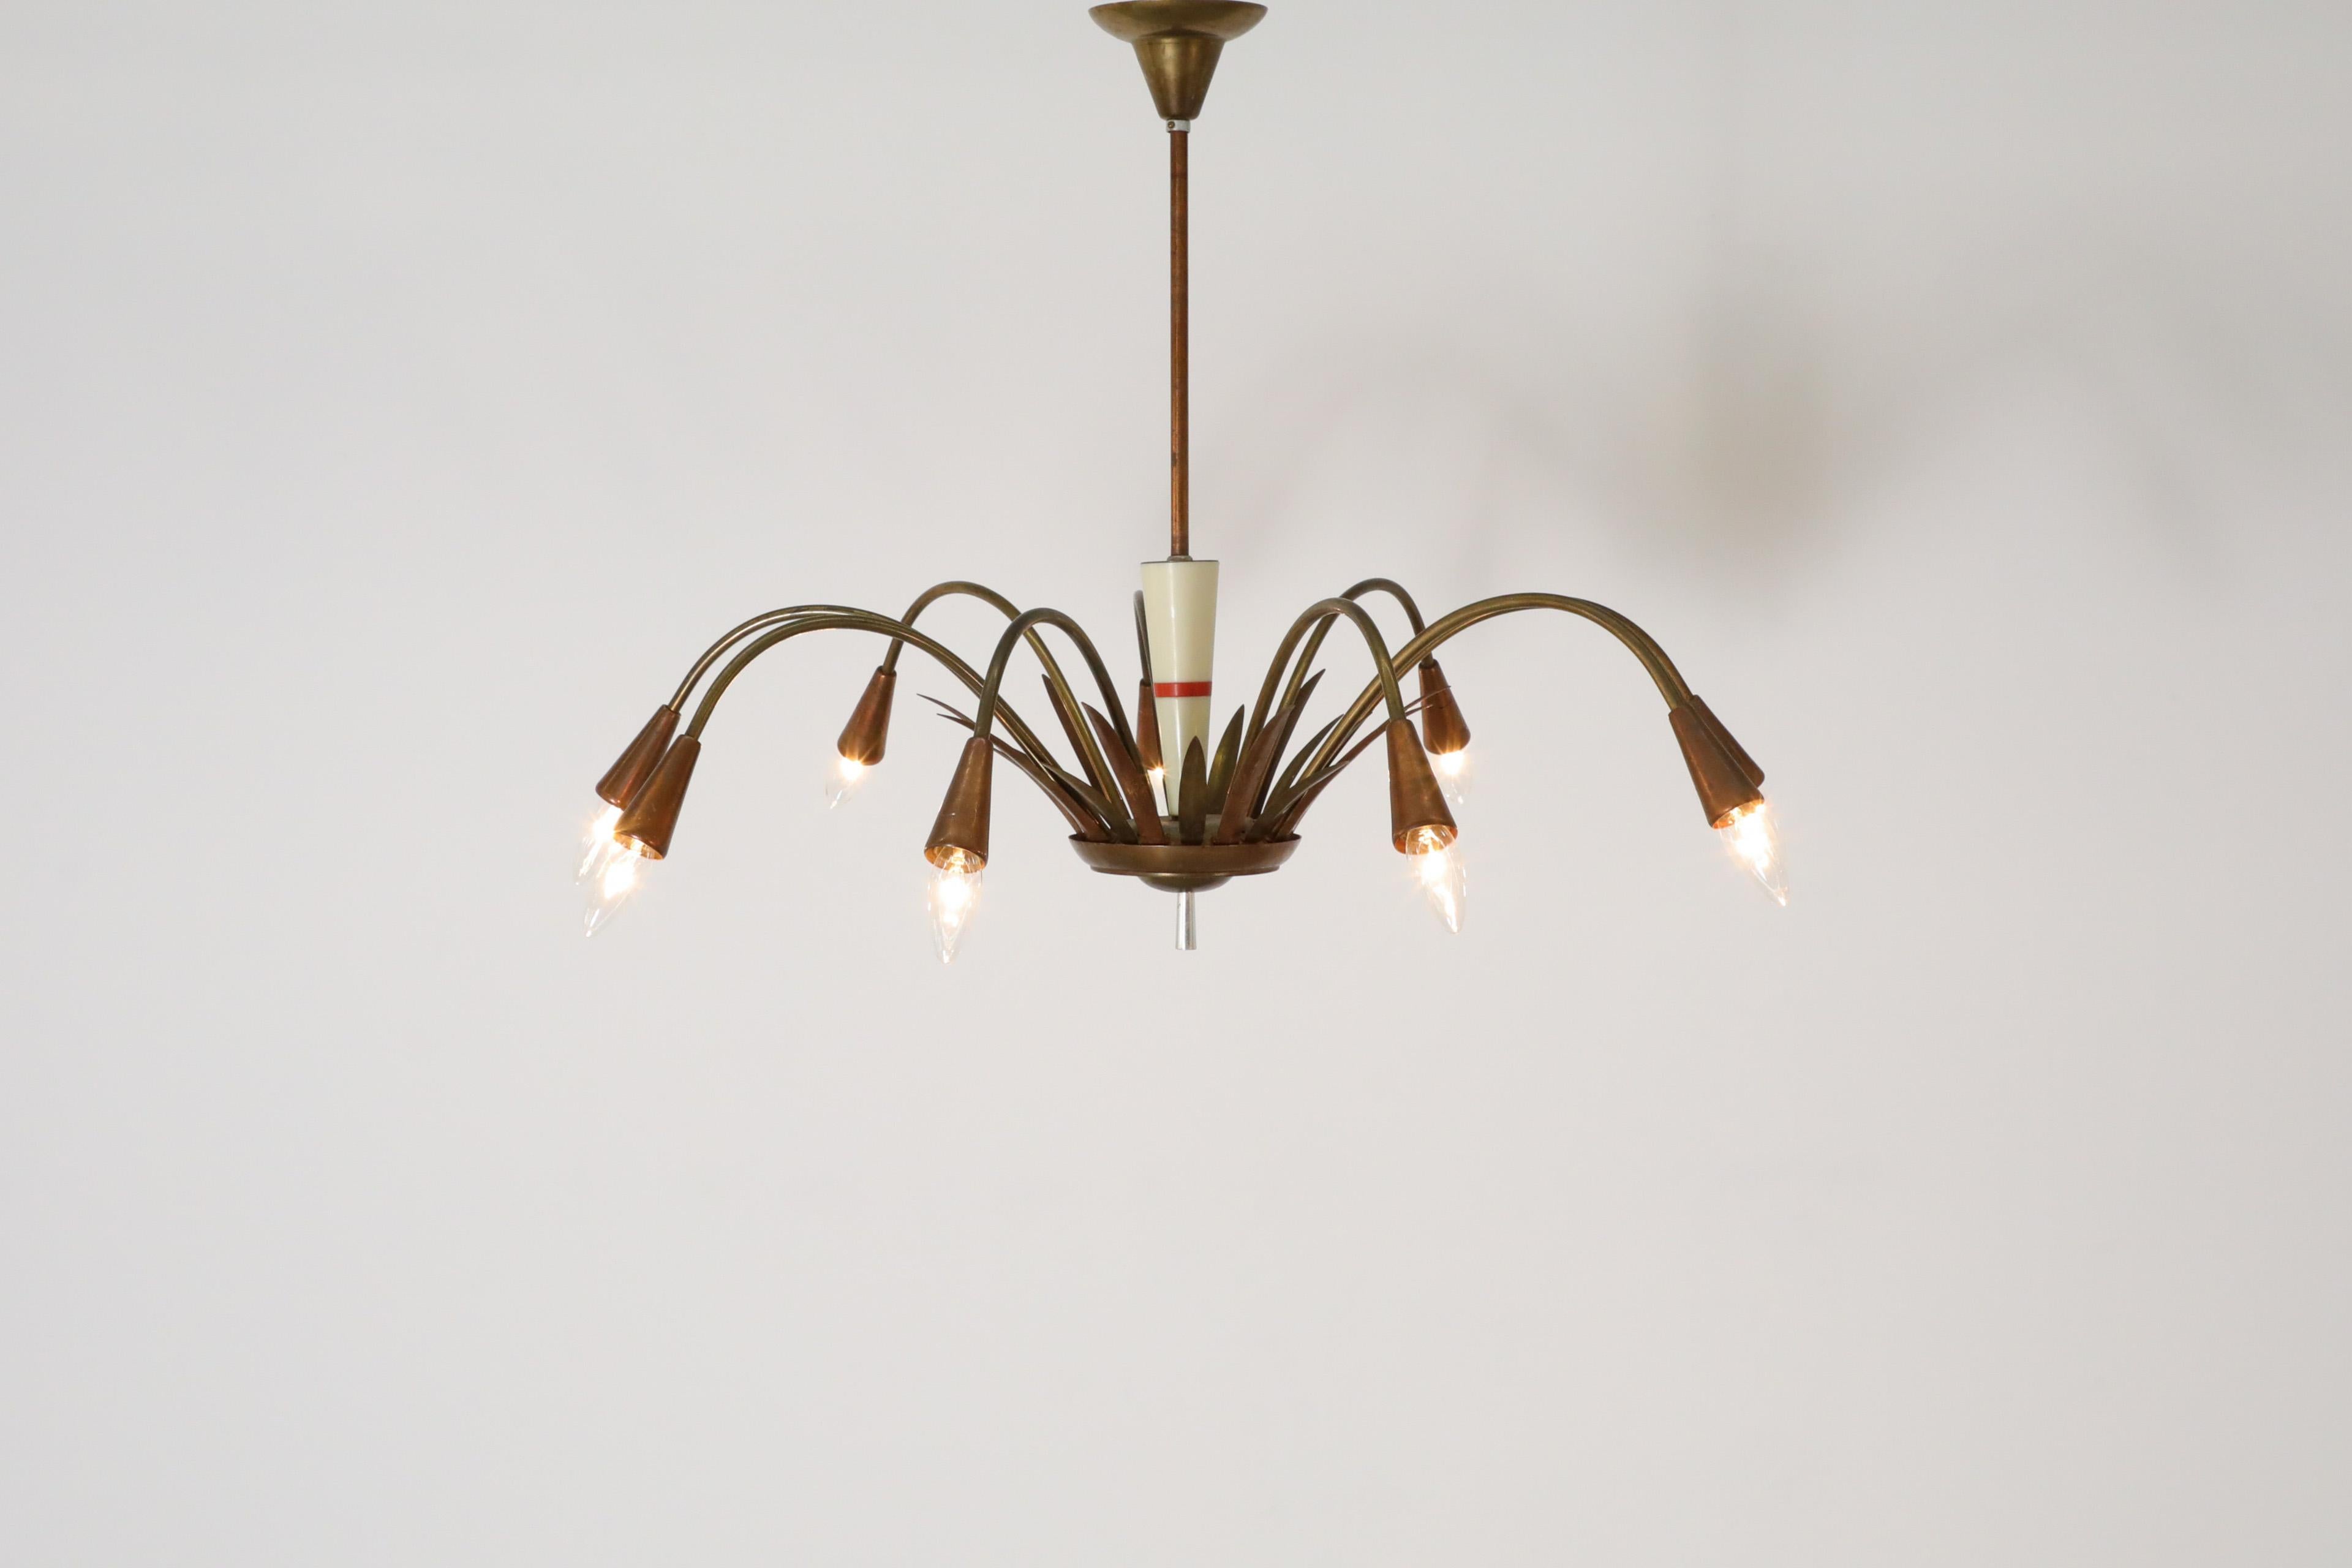 Mid-Century Art Deco inspired copper and brass chandelier with 8 curved arms and attractive, decorative features using both metals. The leaf design at the base surrounds the white conical stem and features a red stripe. Sockets fit European